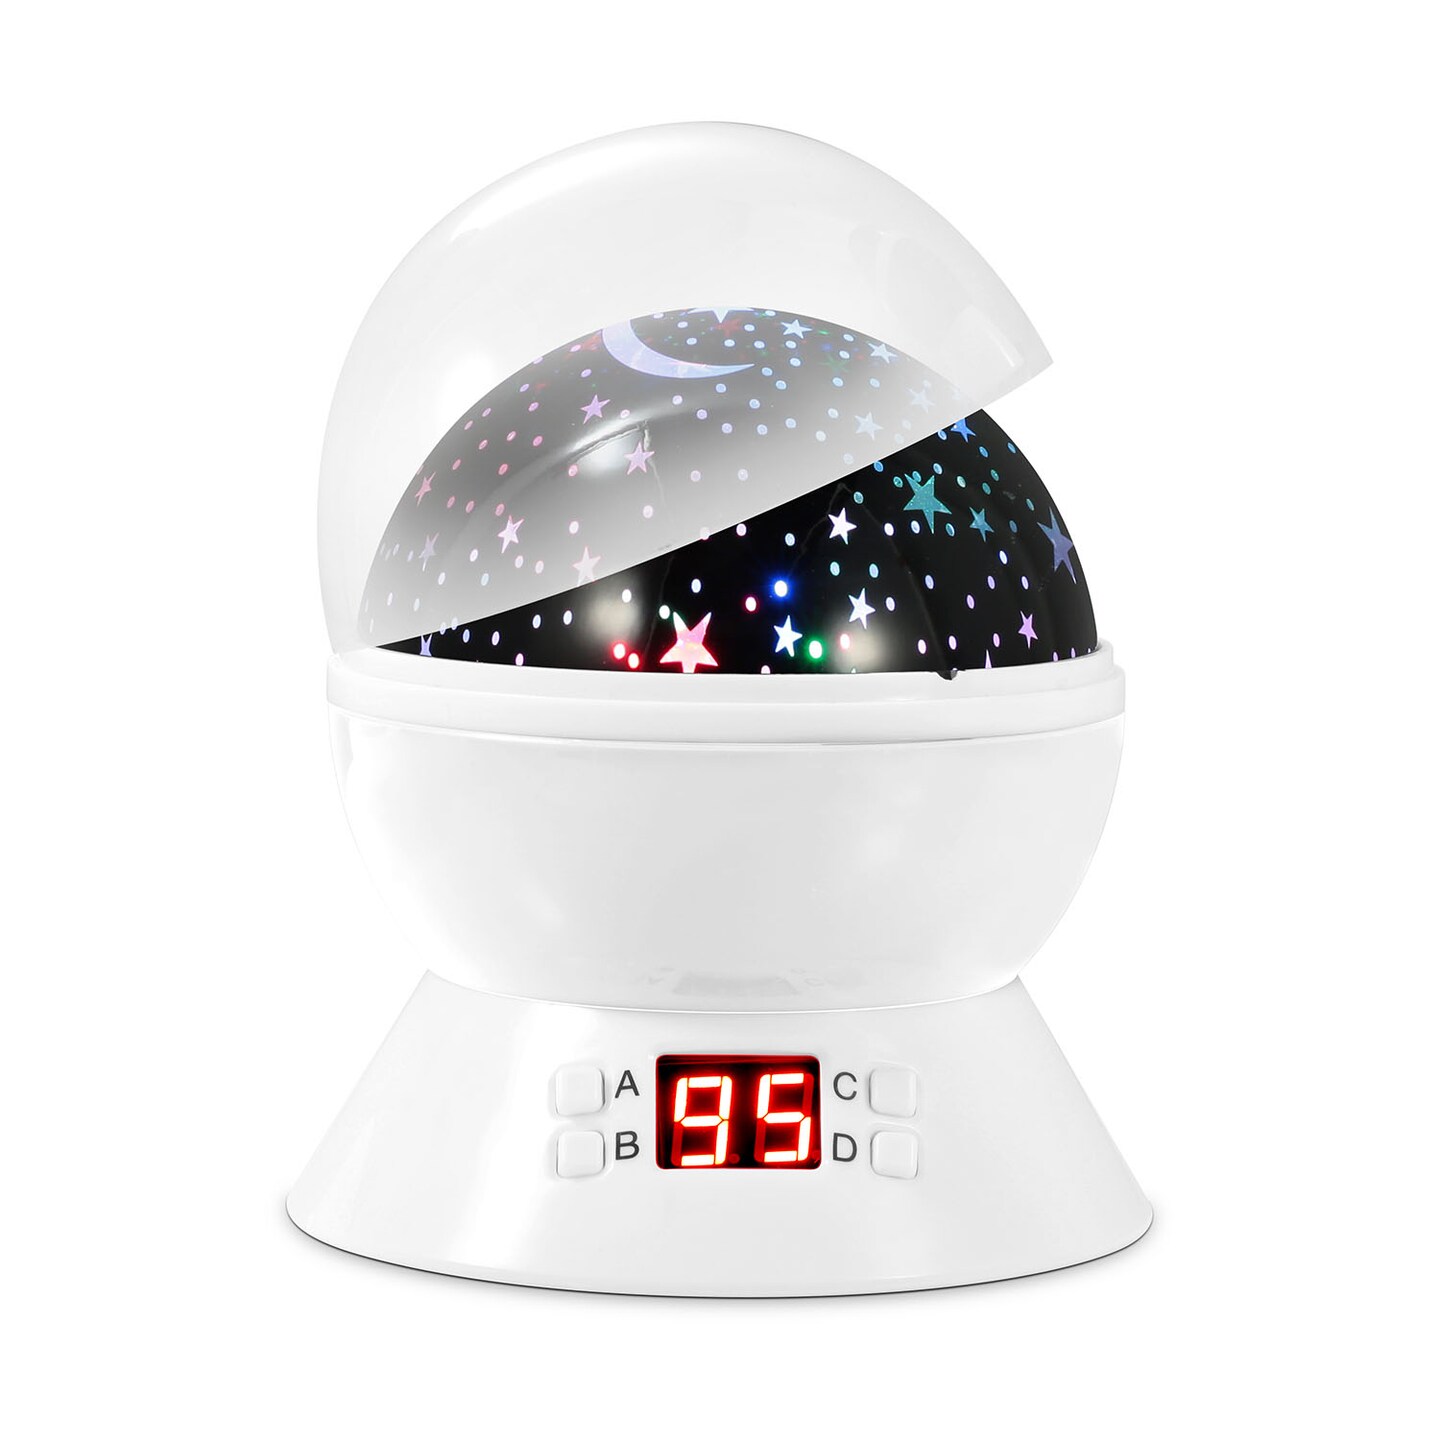 Global Phoenix LED Projector Lamp Kids Night Light Star Moon Projection Night Lamp 360 Rotation Timer for Children Bedroom